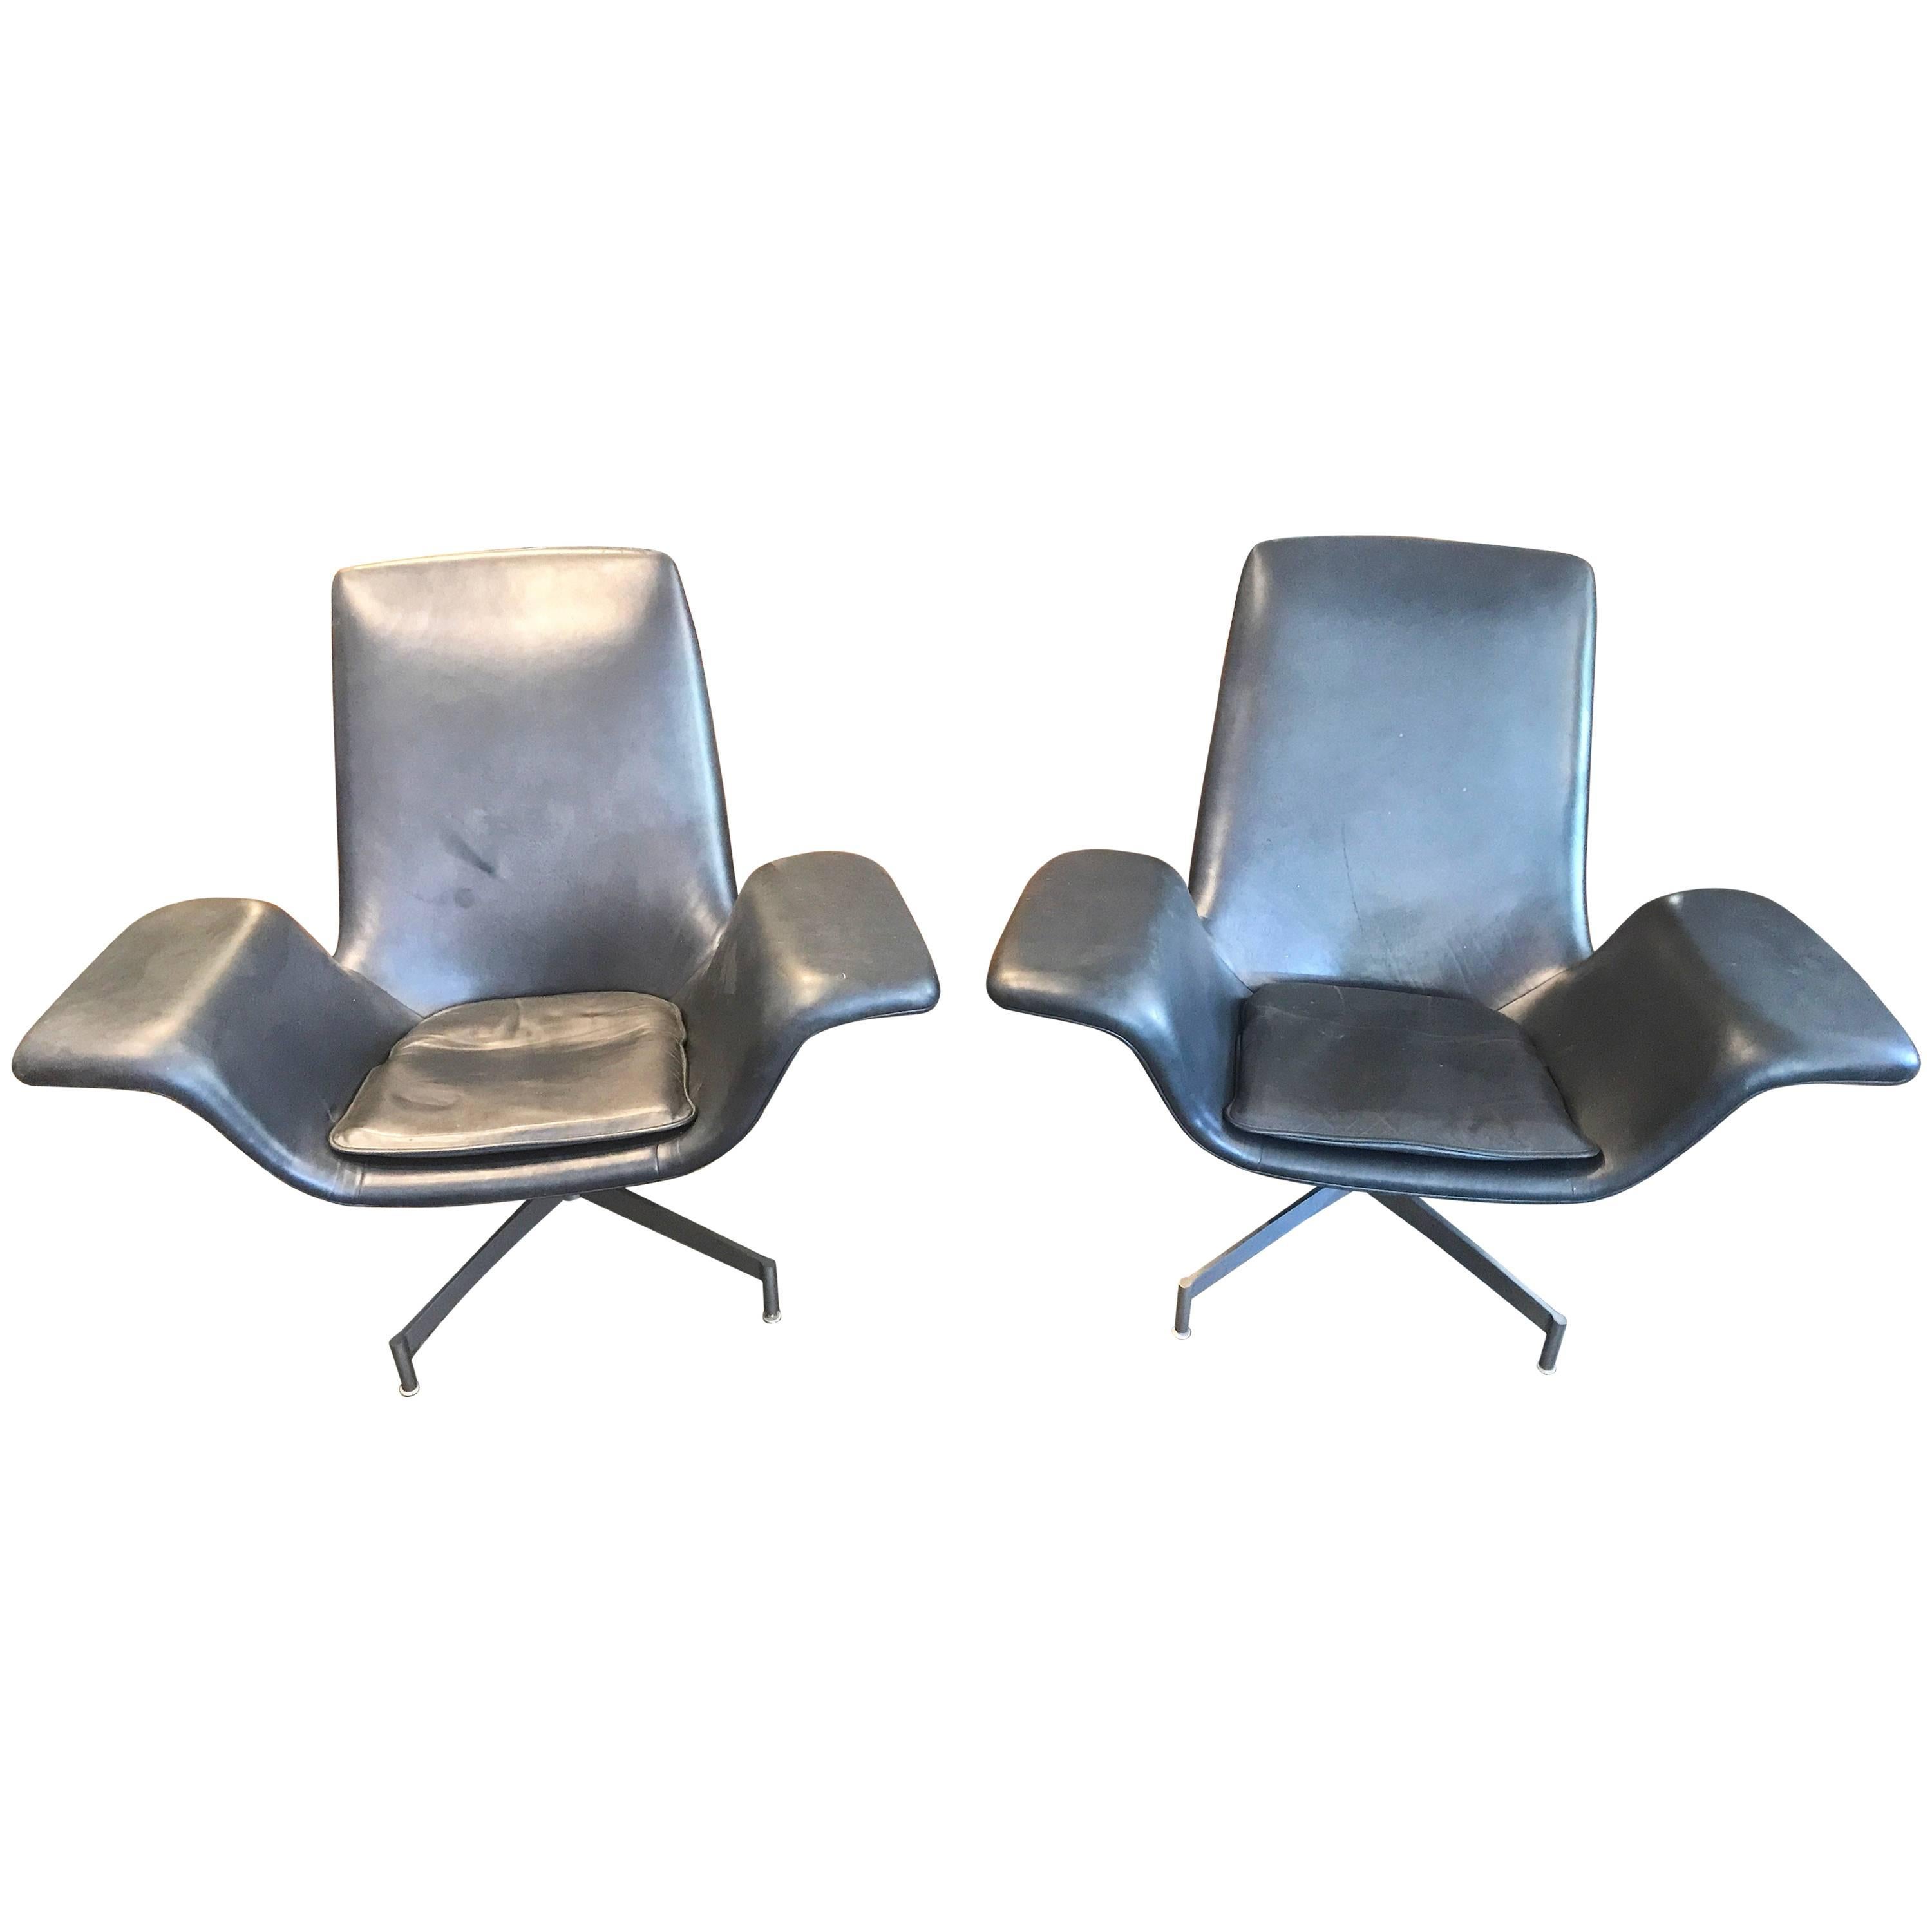 Pair of Modern Leather HBF "Dialogue" Home or Office Swivel Lounge Chairs